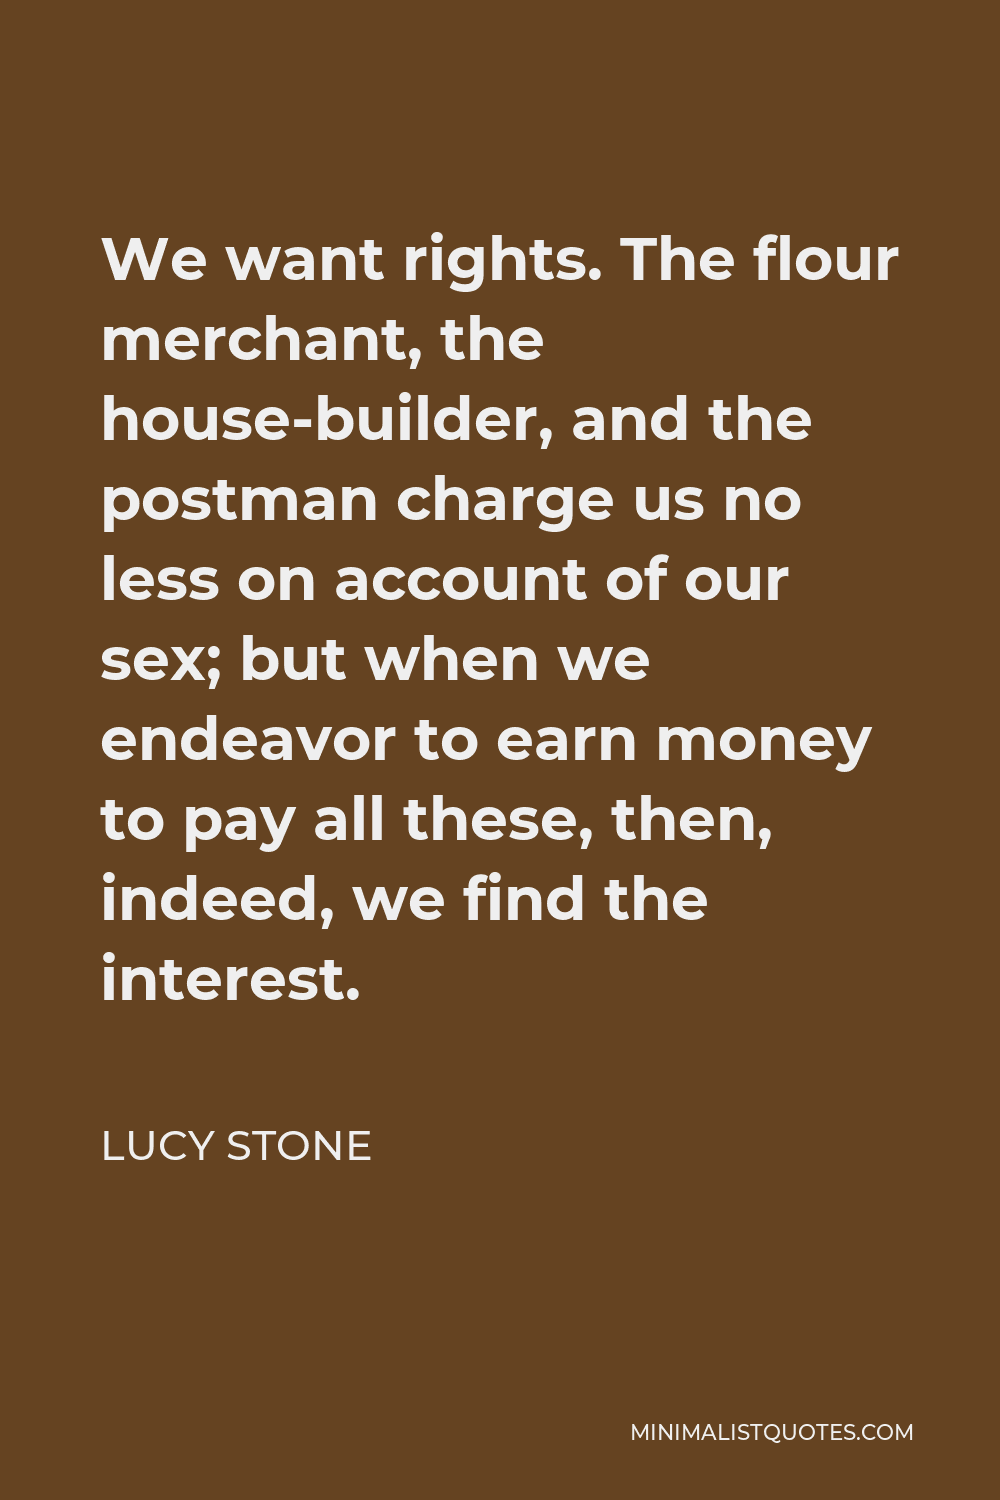 Lucy Stone Quote - We want rights. The flour merchant, the house-builder, and the postman charge us no less on account of our sex; but when we endeavor to earn money to pay all these, then, indeed, we find the interest.